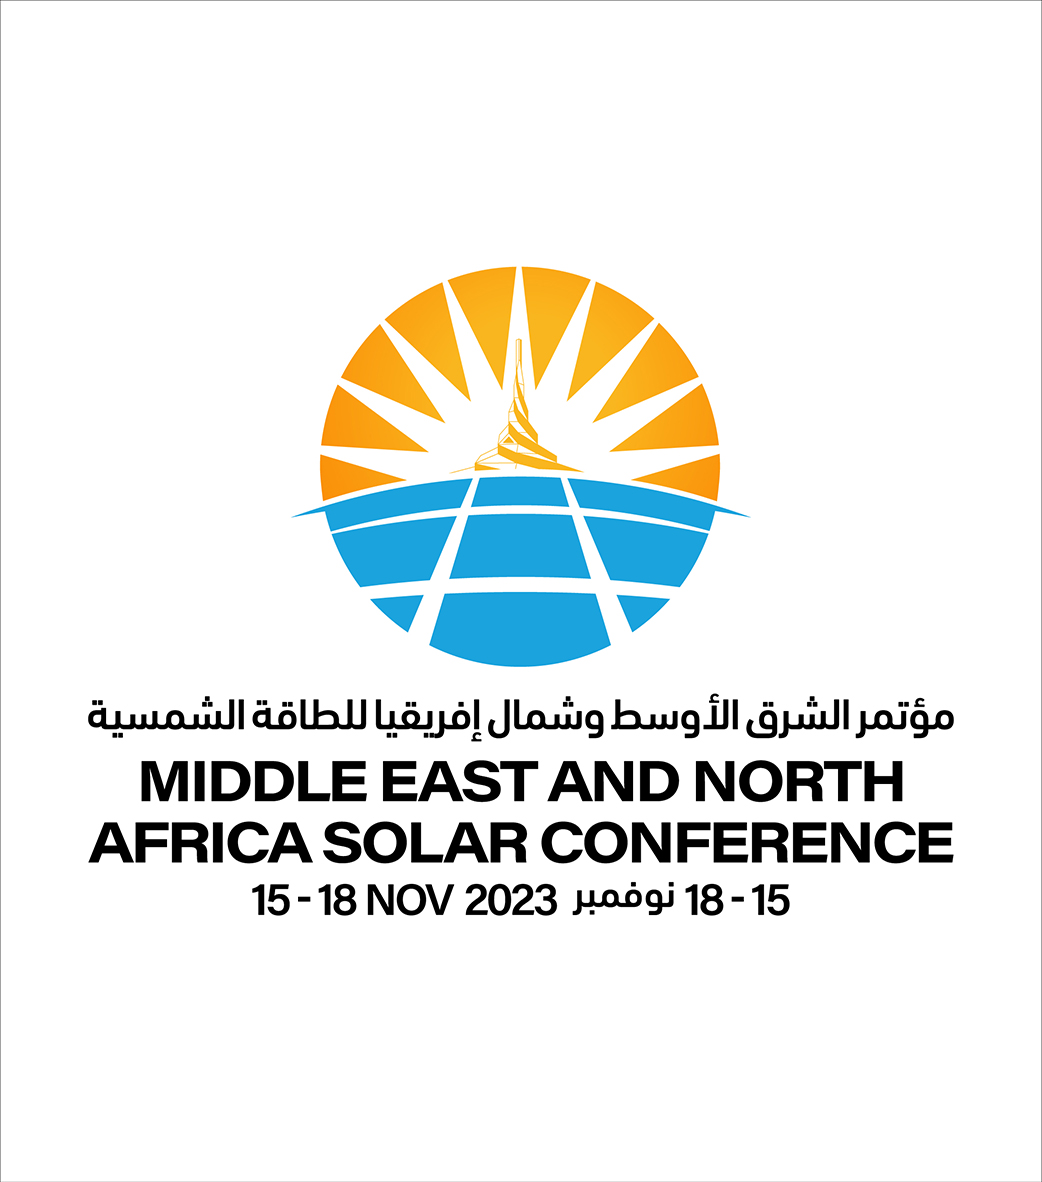 The MENA-SC is organized by six topical areas. Descriptions of each area are presented below.